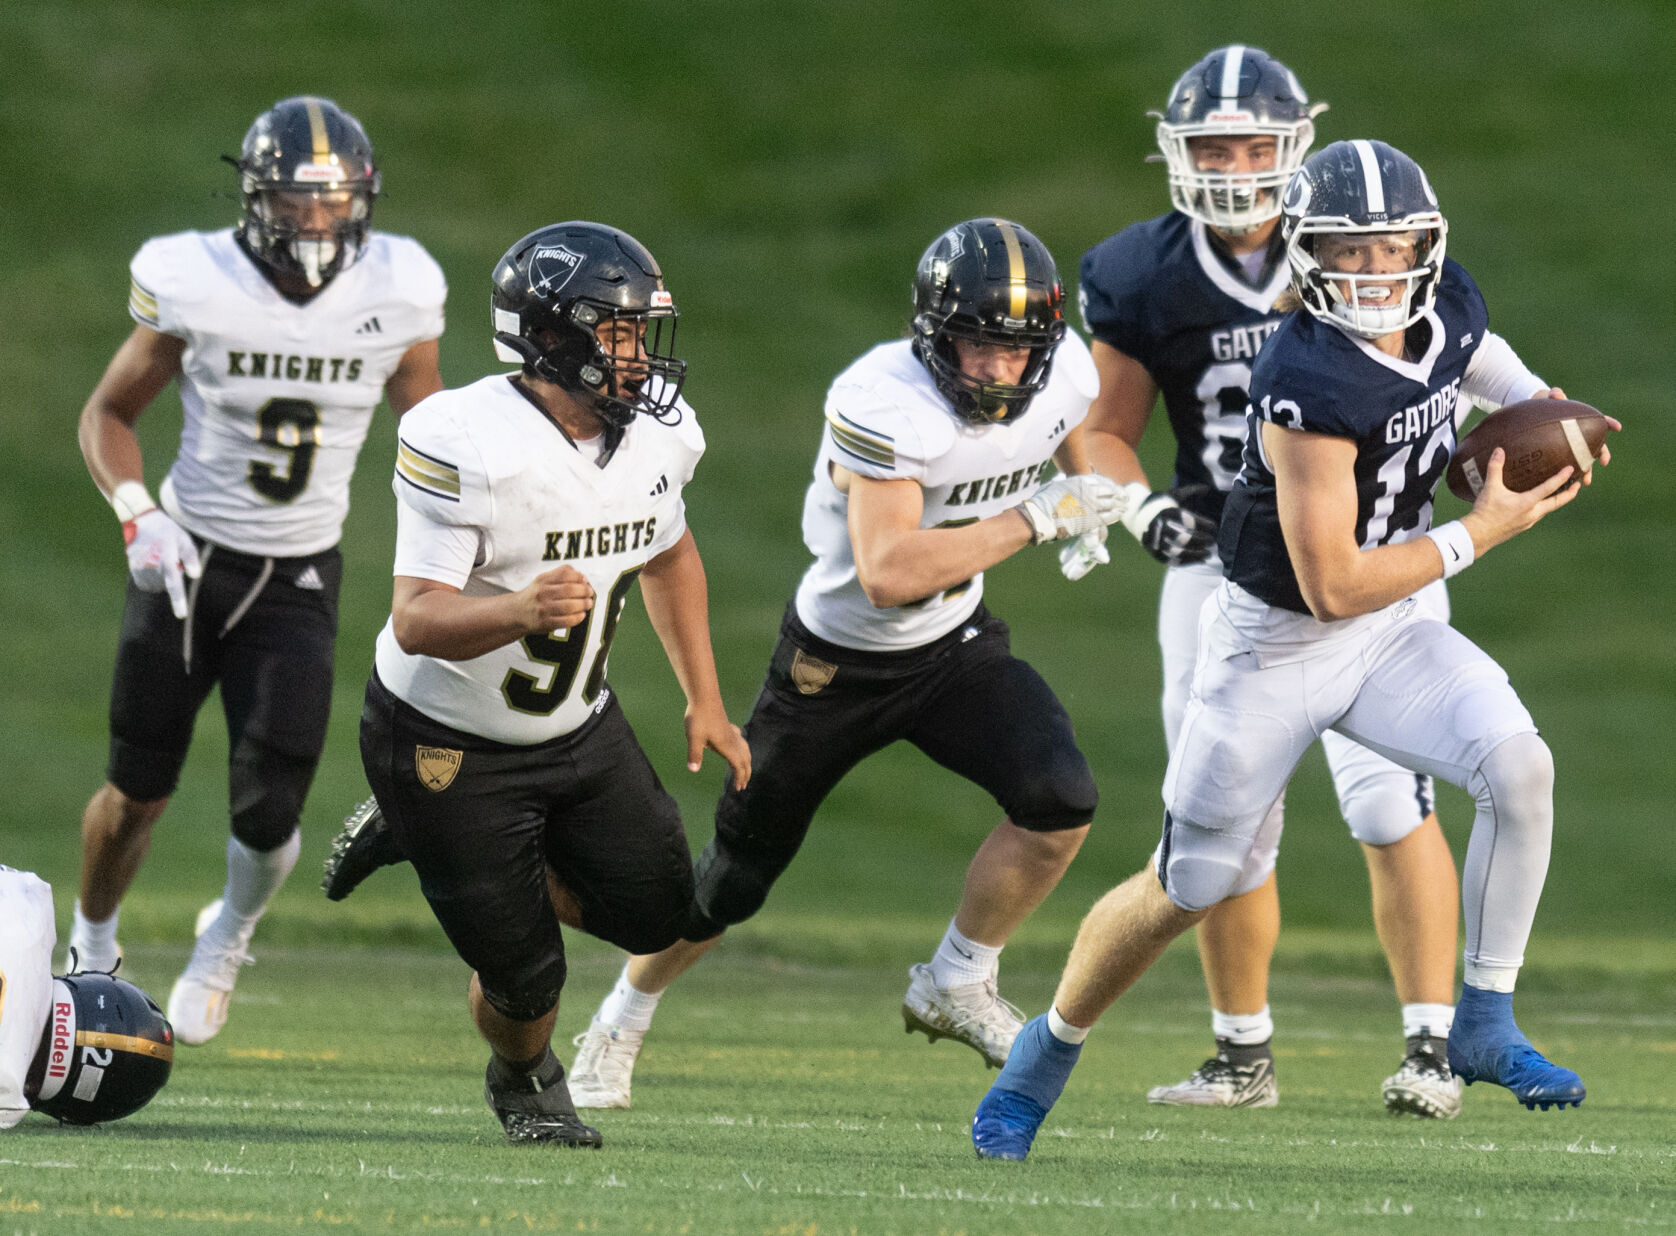 Lincoln North Star aims to secure a playoff berth in their biggest game in years